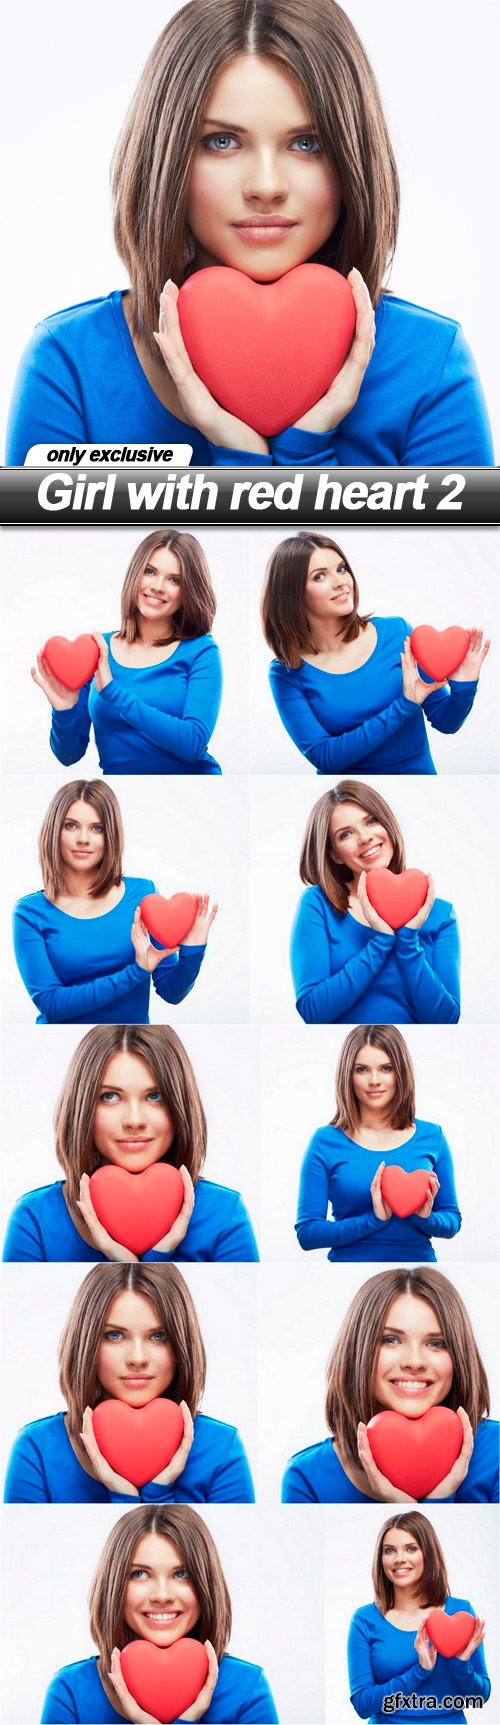 Girl with red heart 2 - 10 UHQ JPEG